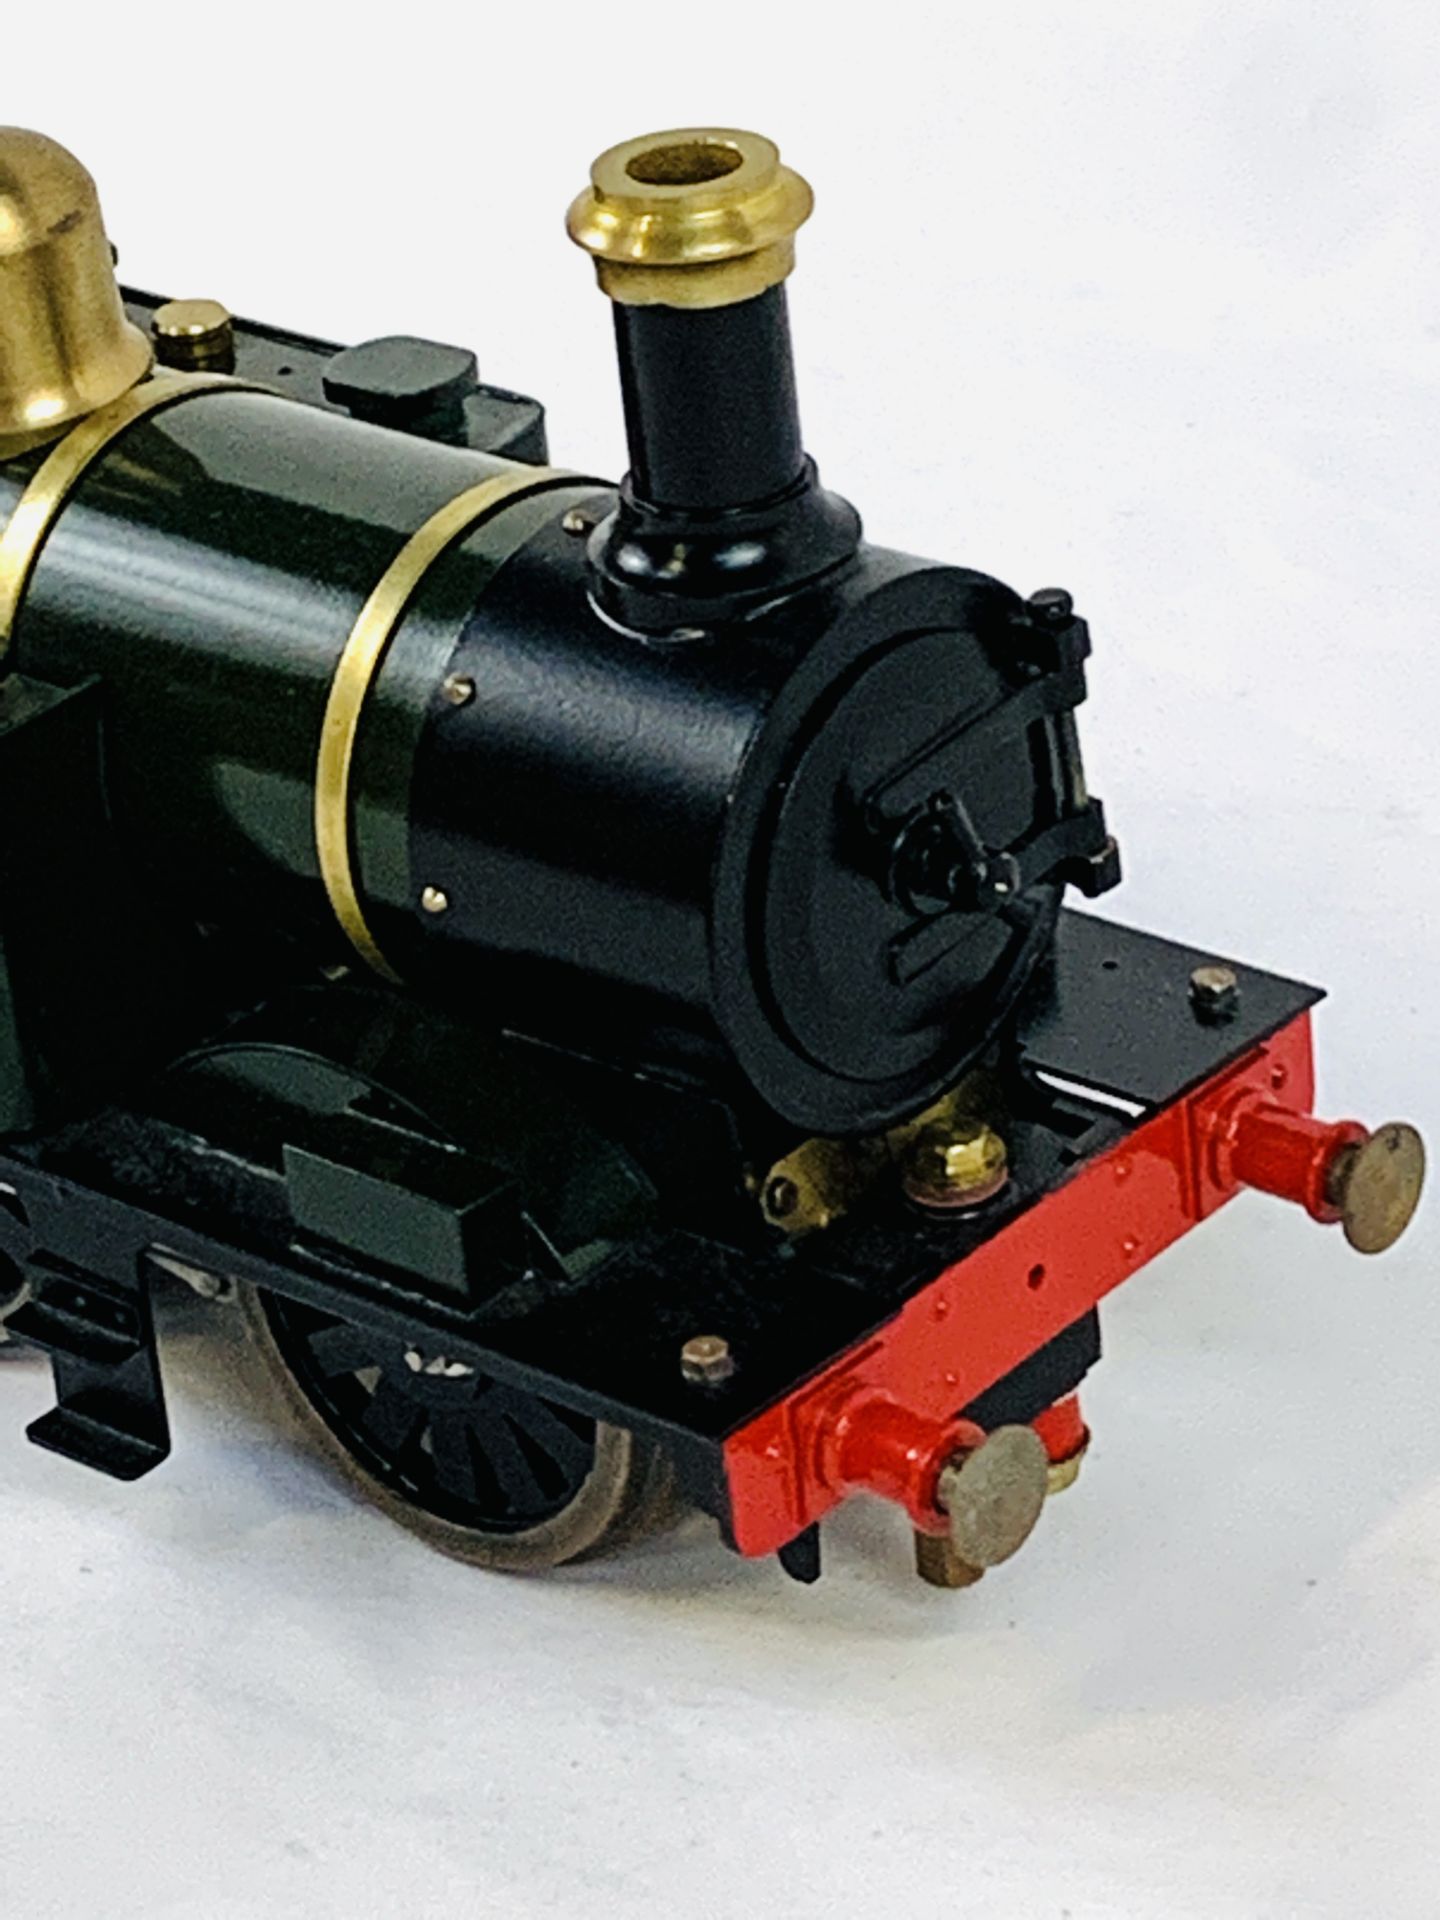 A model GWR 1400 class locomotive in gauge 1 - Image 4 of 5